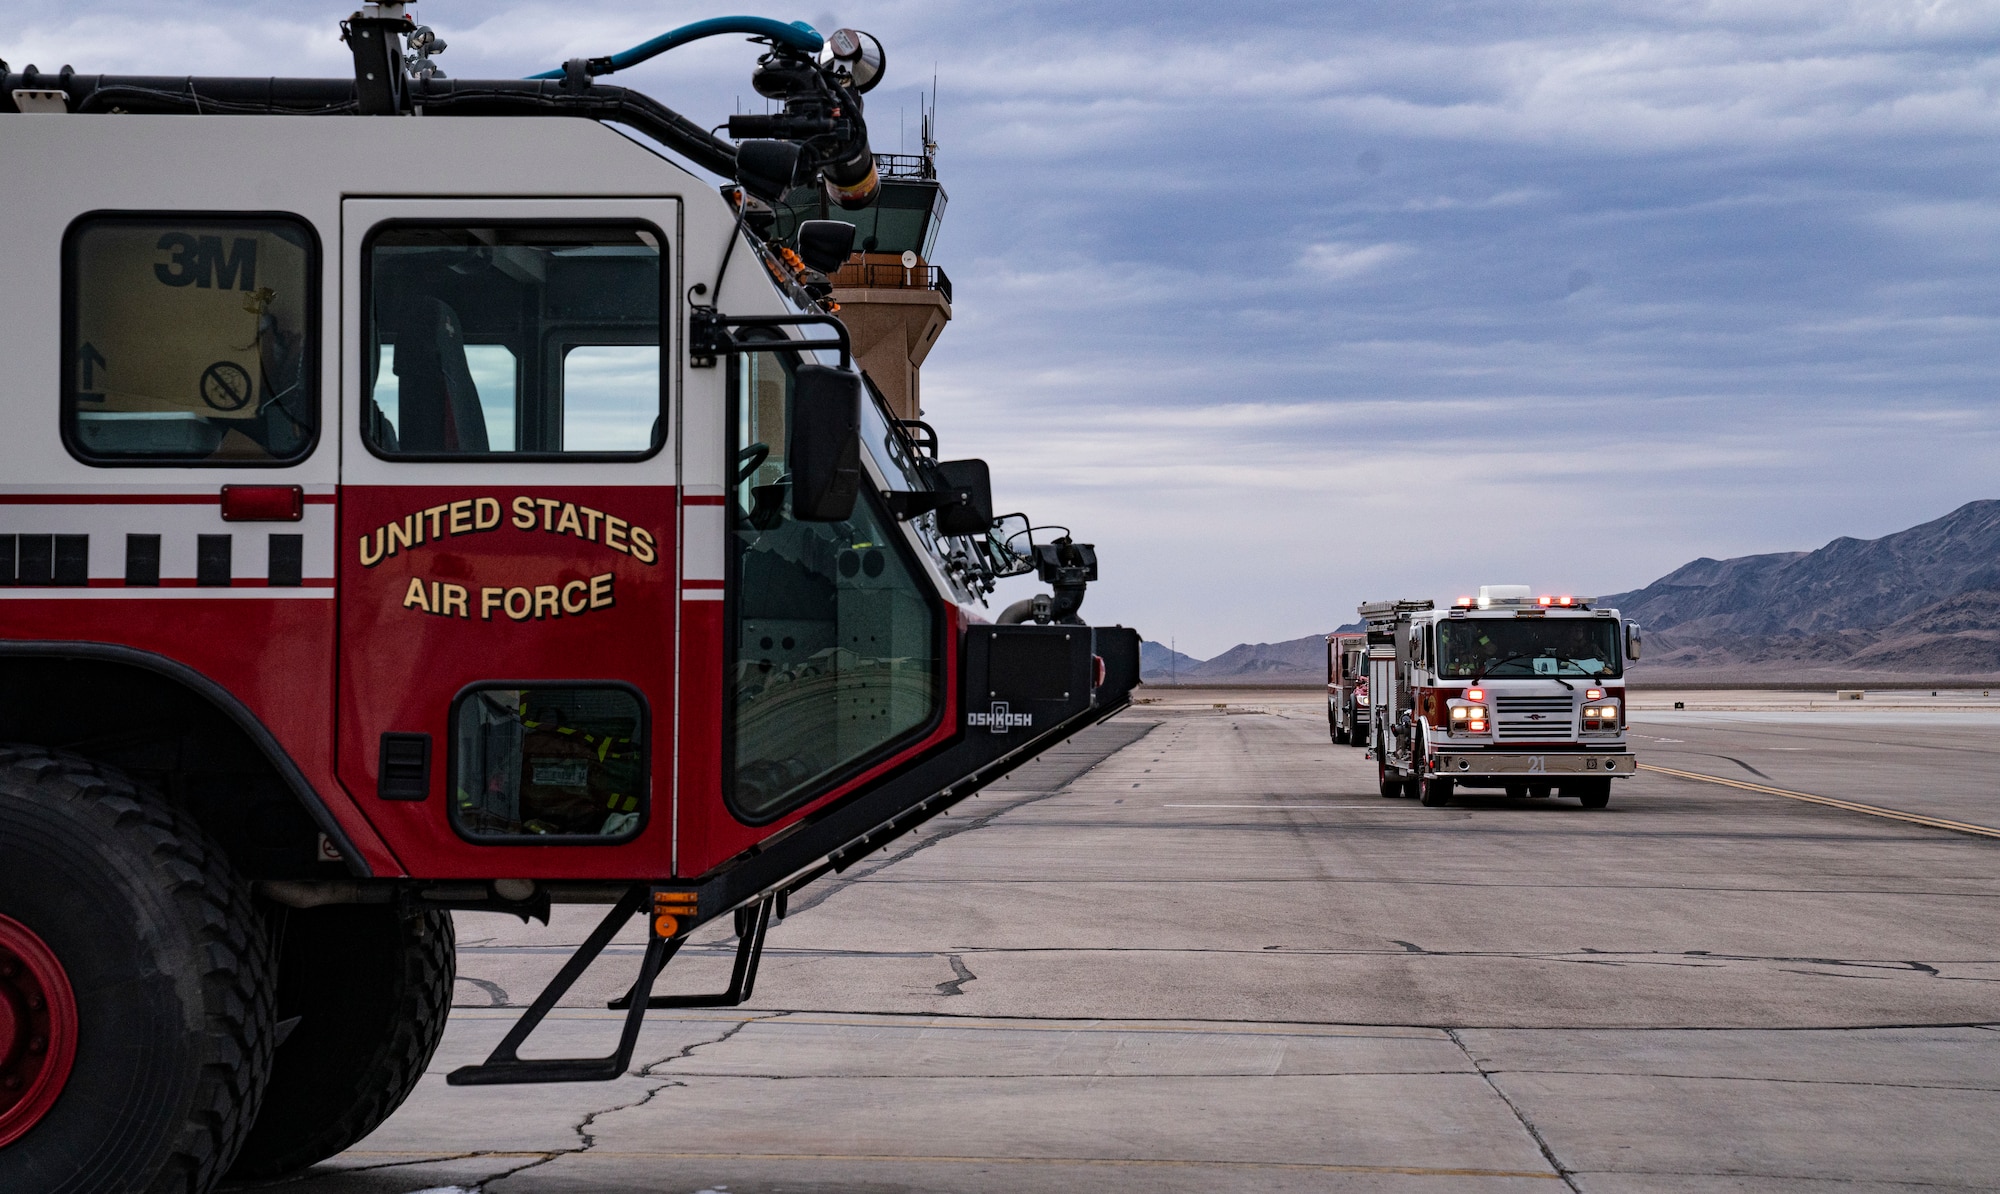 A Creech Air Force Base Fire Department tanker and fire engine drive on the flight line.